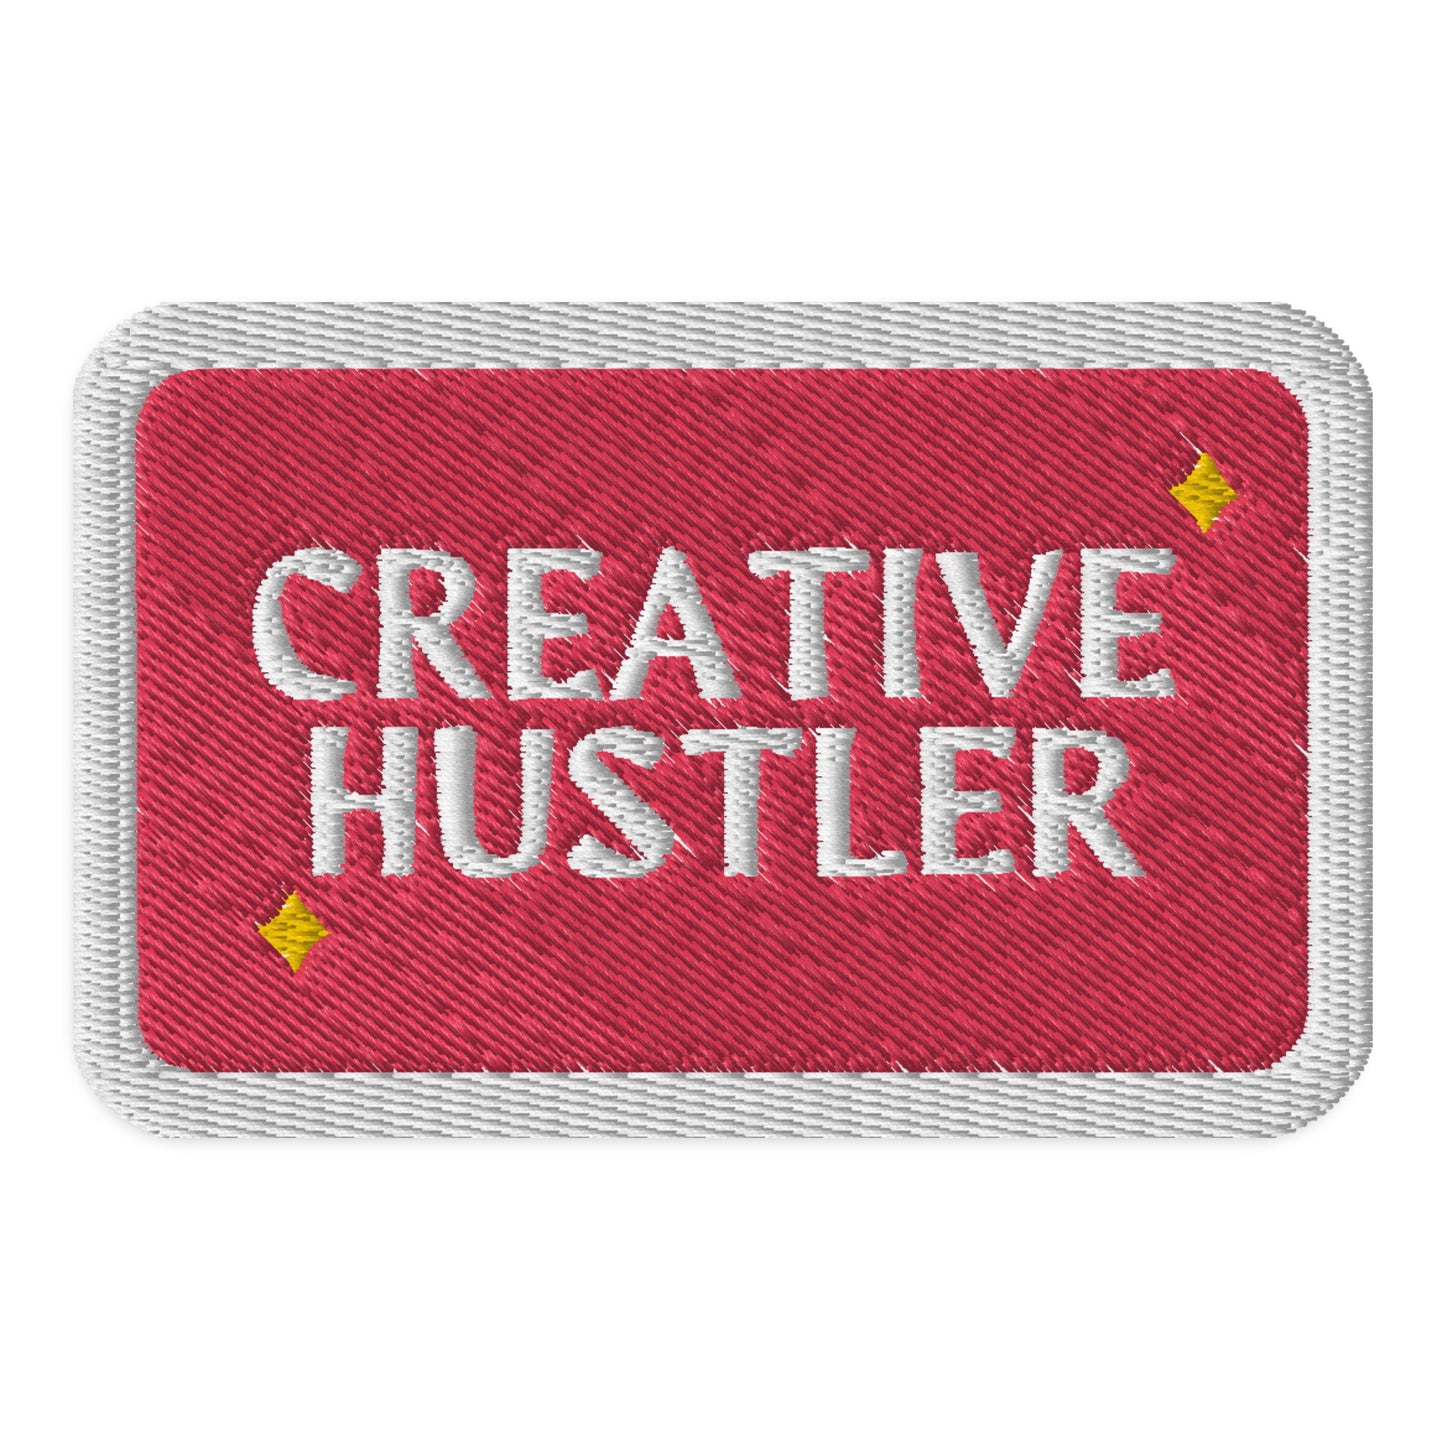 Creative Hustler Badge {Embroidered patches}